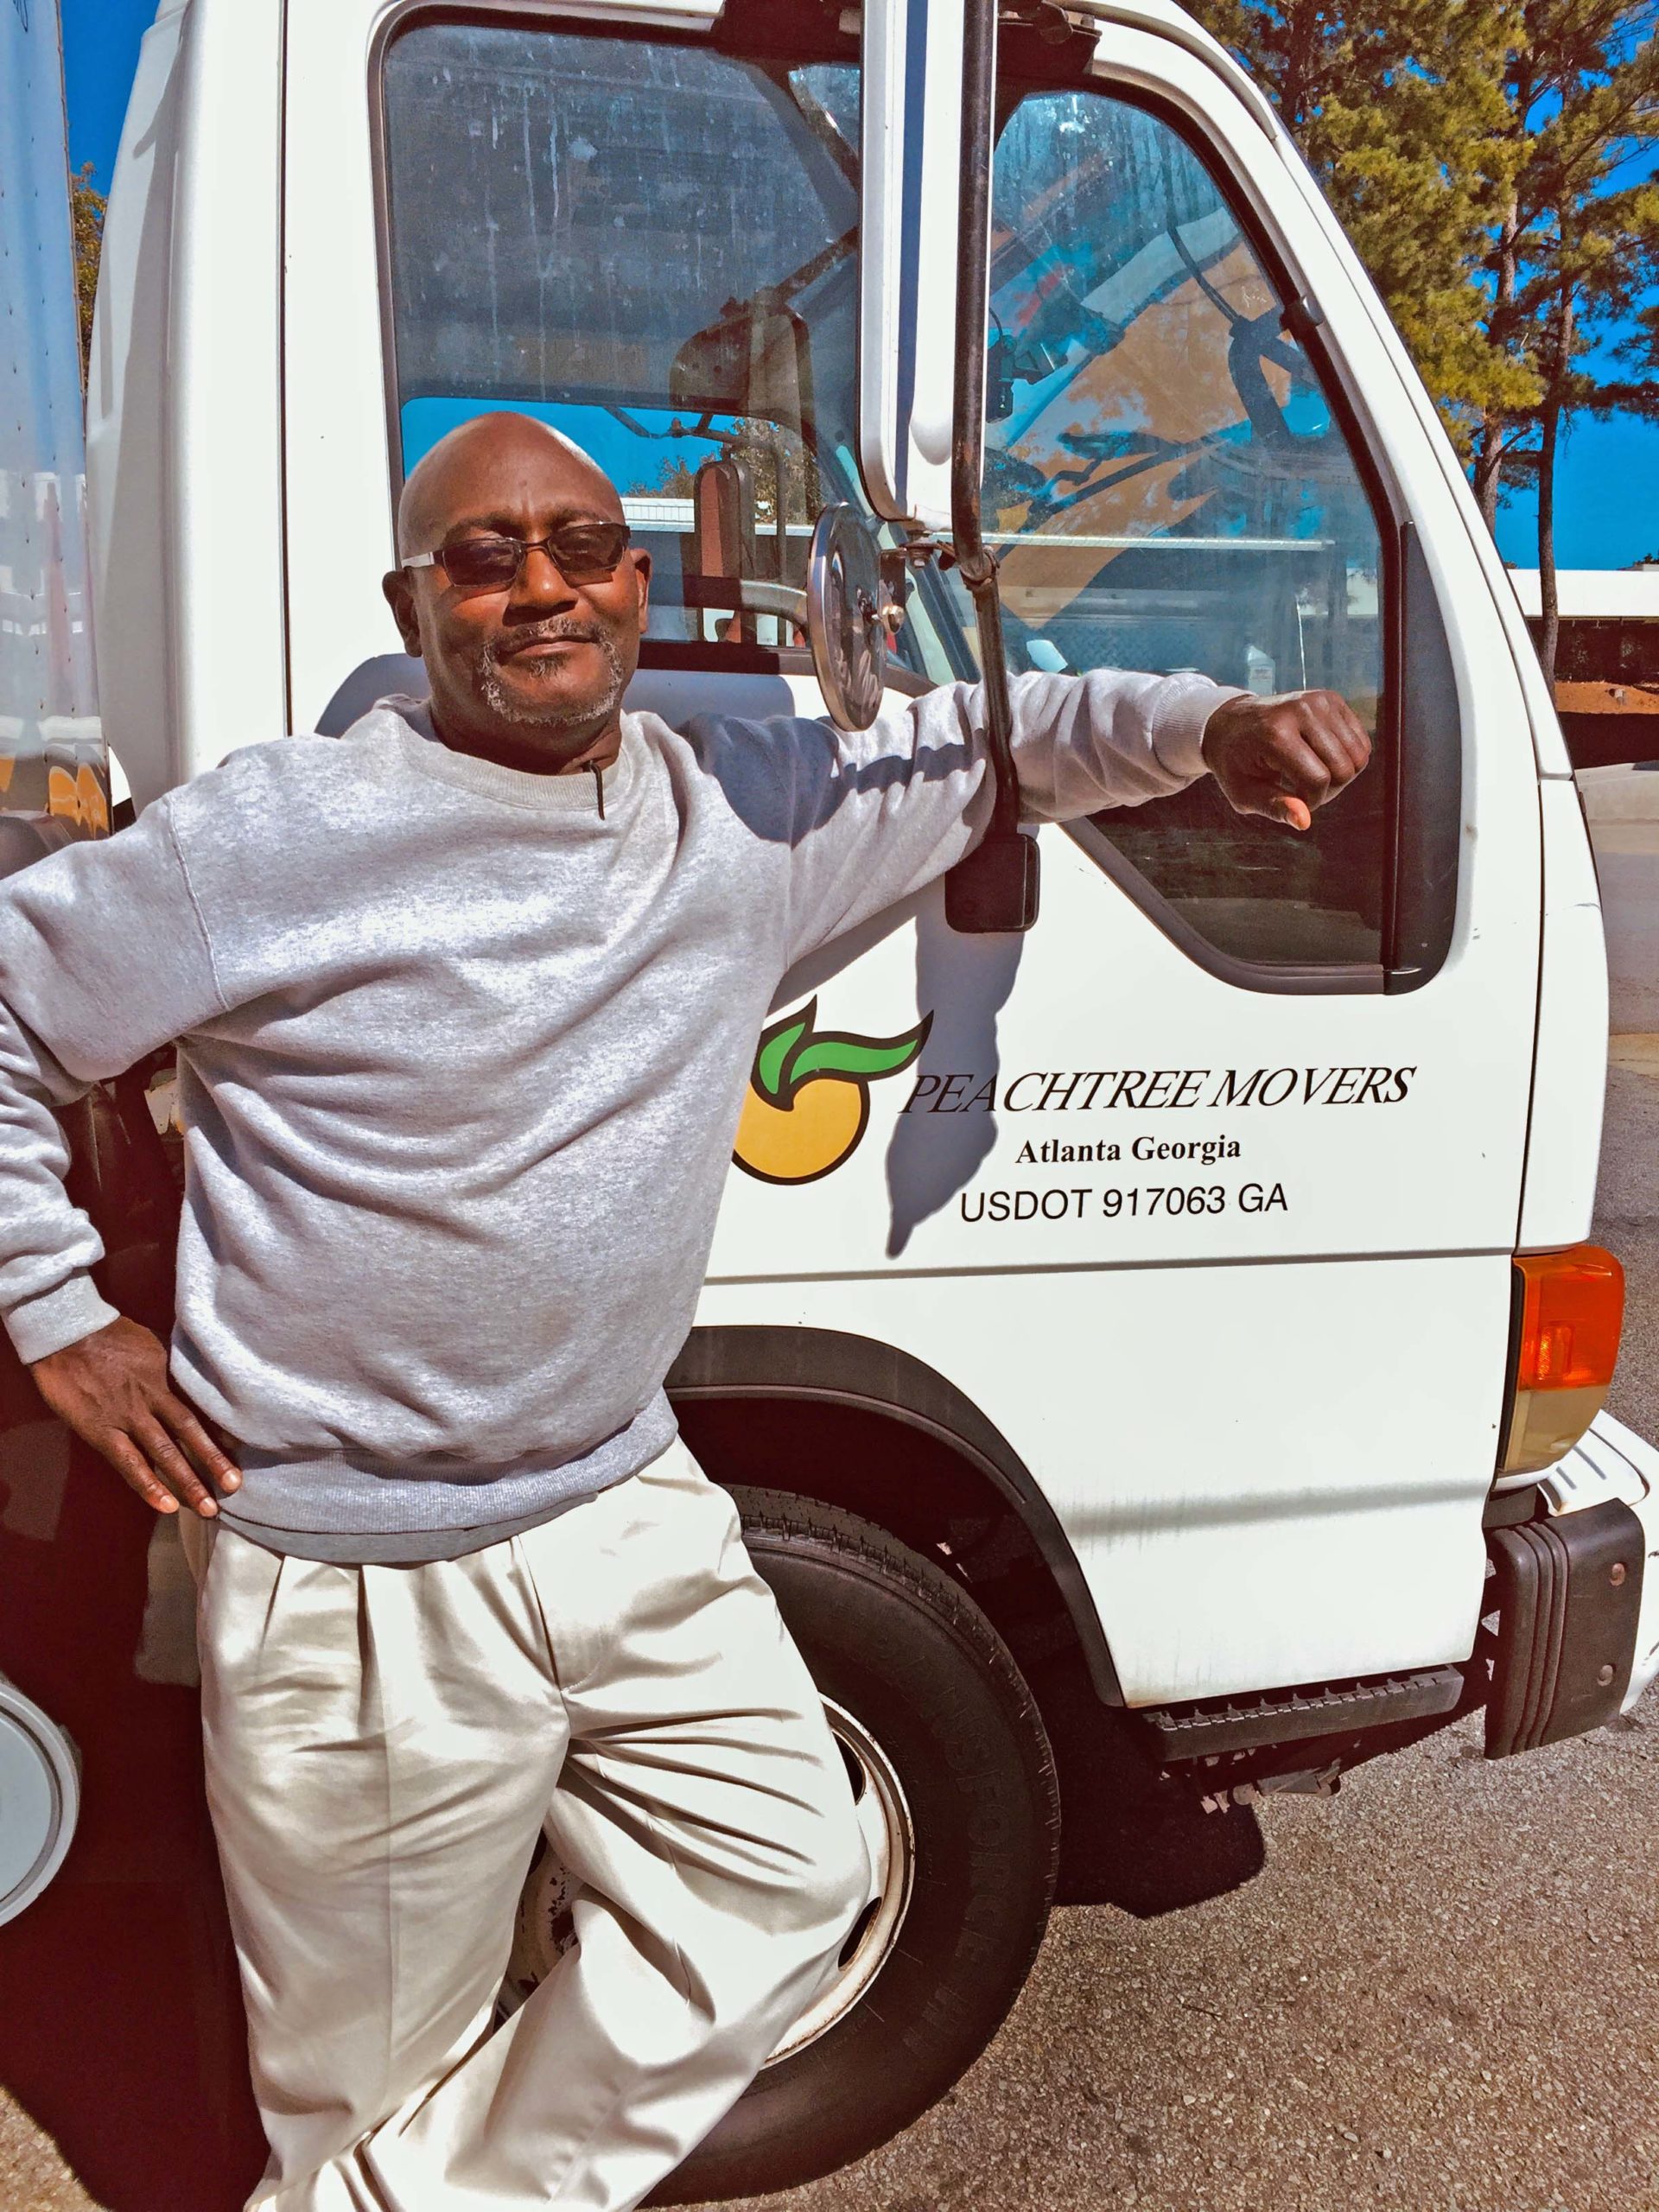 Dexter Cook—one of the best supervisors at Peachtree Movers